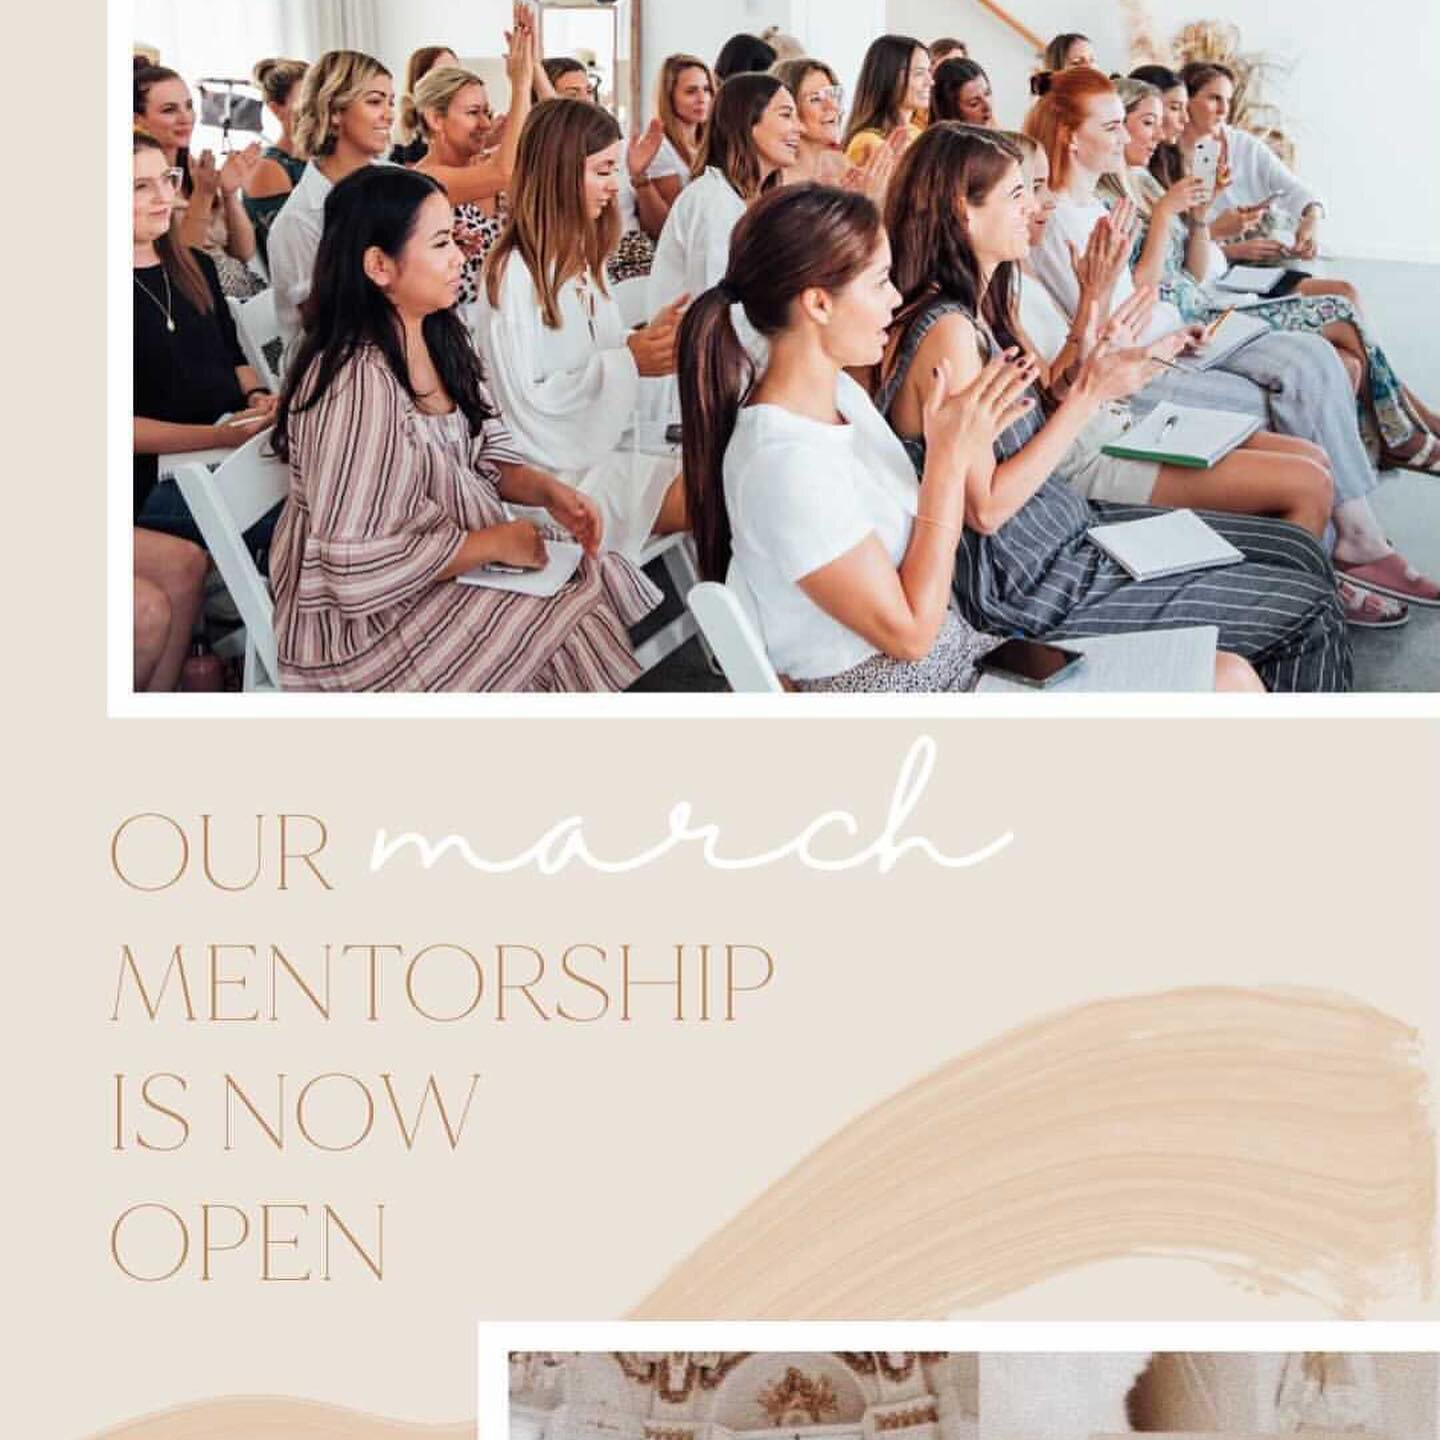 Do you have a desire to make a change, step into your power and thrive, whilst helping others?
⠀
What if you could?⠀
⠀
I have the absolute pleasure of inviting 3 heart-driven women to join the Rise Collective and be personally mentored by me for the 